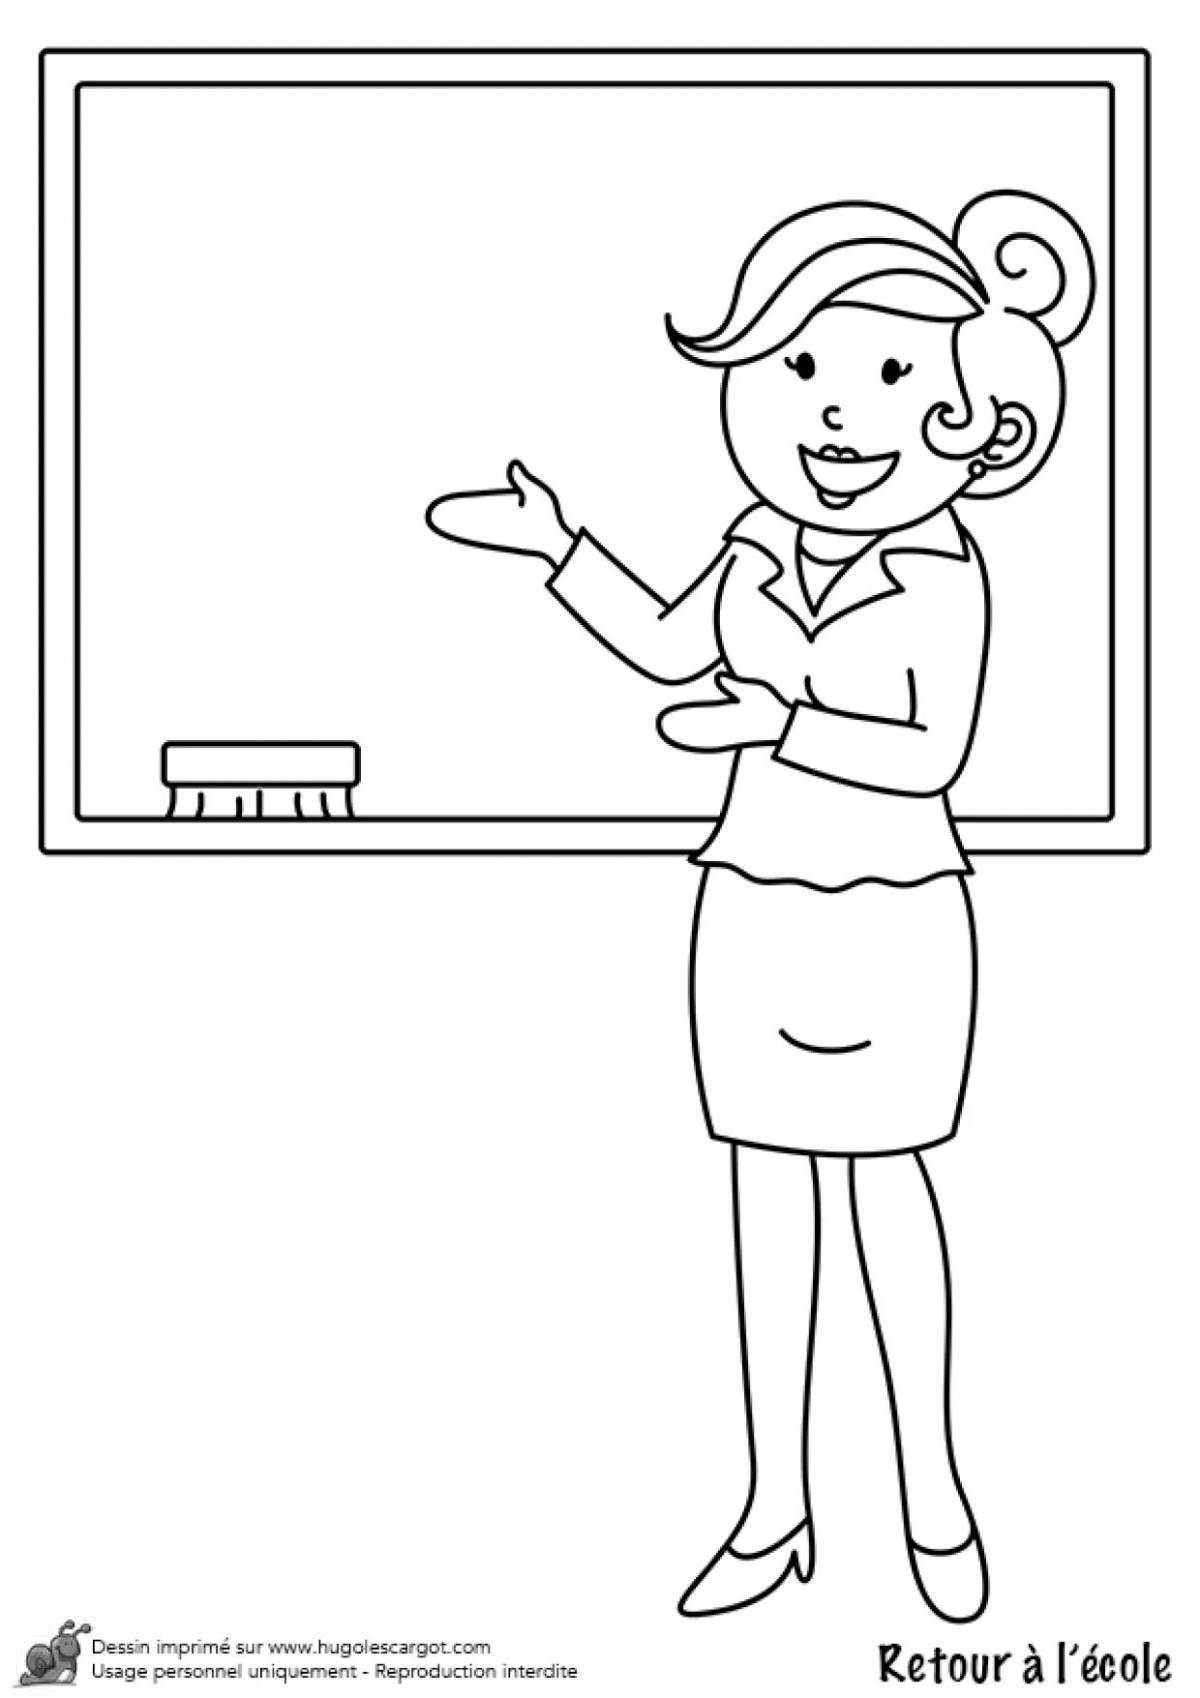 Colorful teacher drawing coloring page